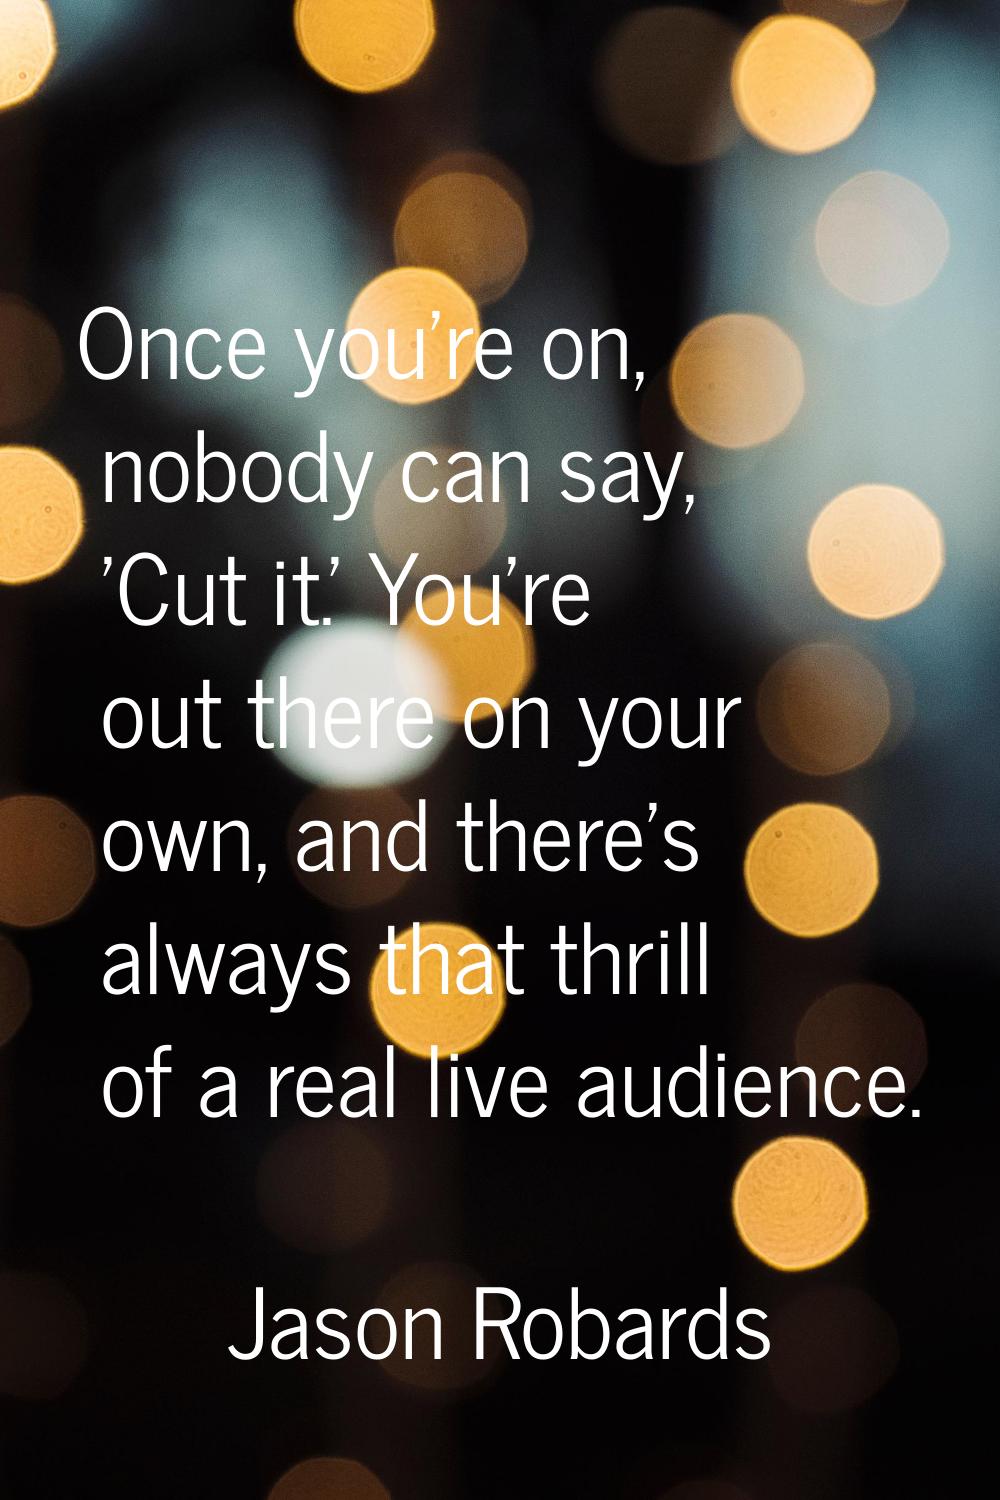 Once you're on, nobody can say, 'Cut it.' You're out there on your own, and there's always that thr